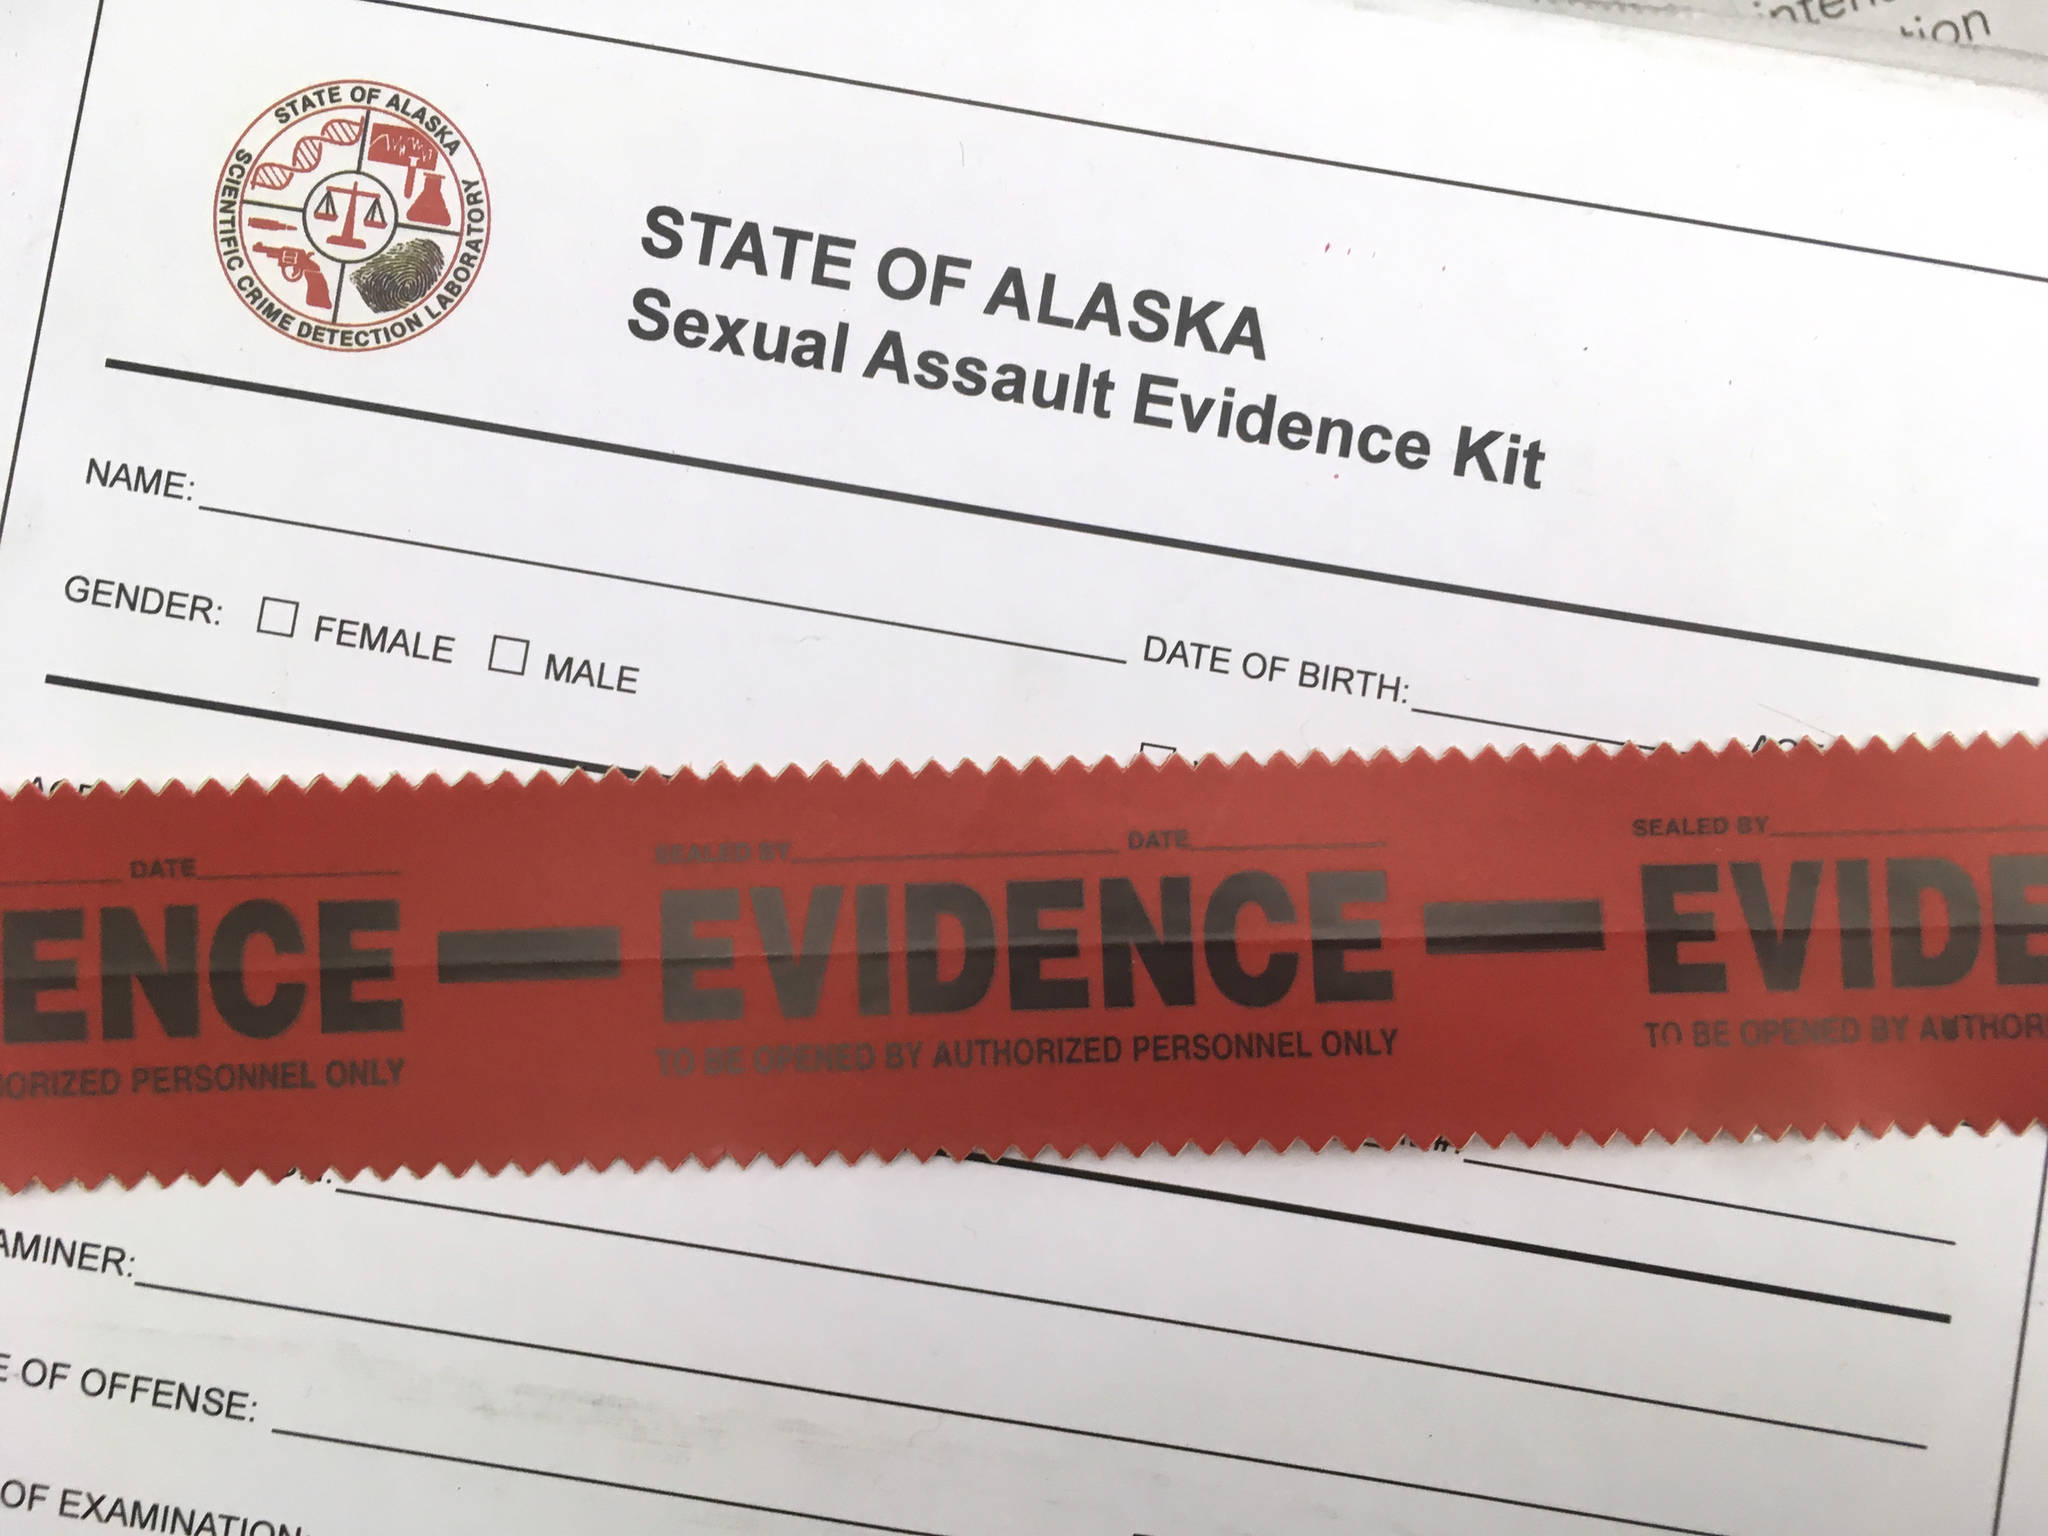 Felony sexual offense reports rise sharply across Alaska, except Southeast